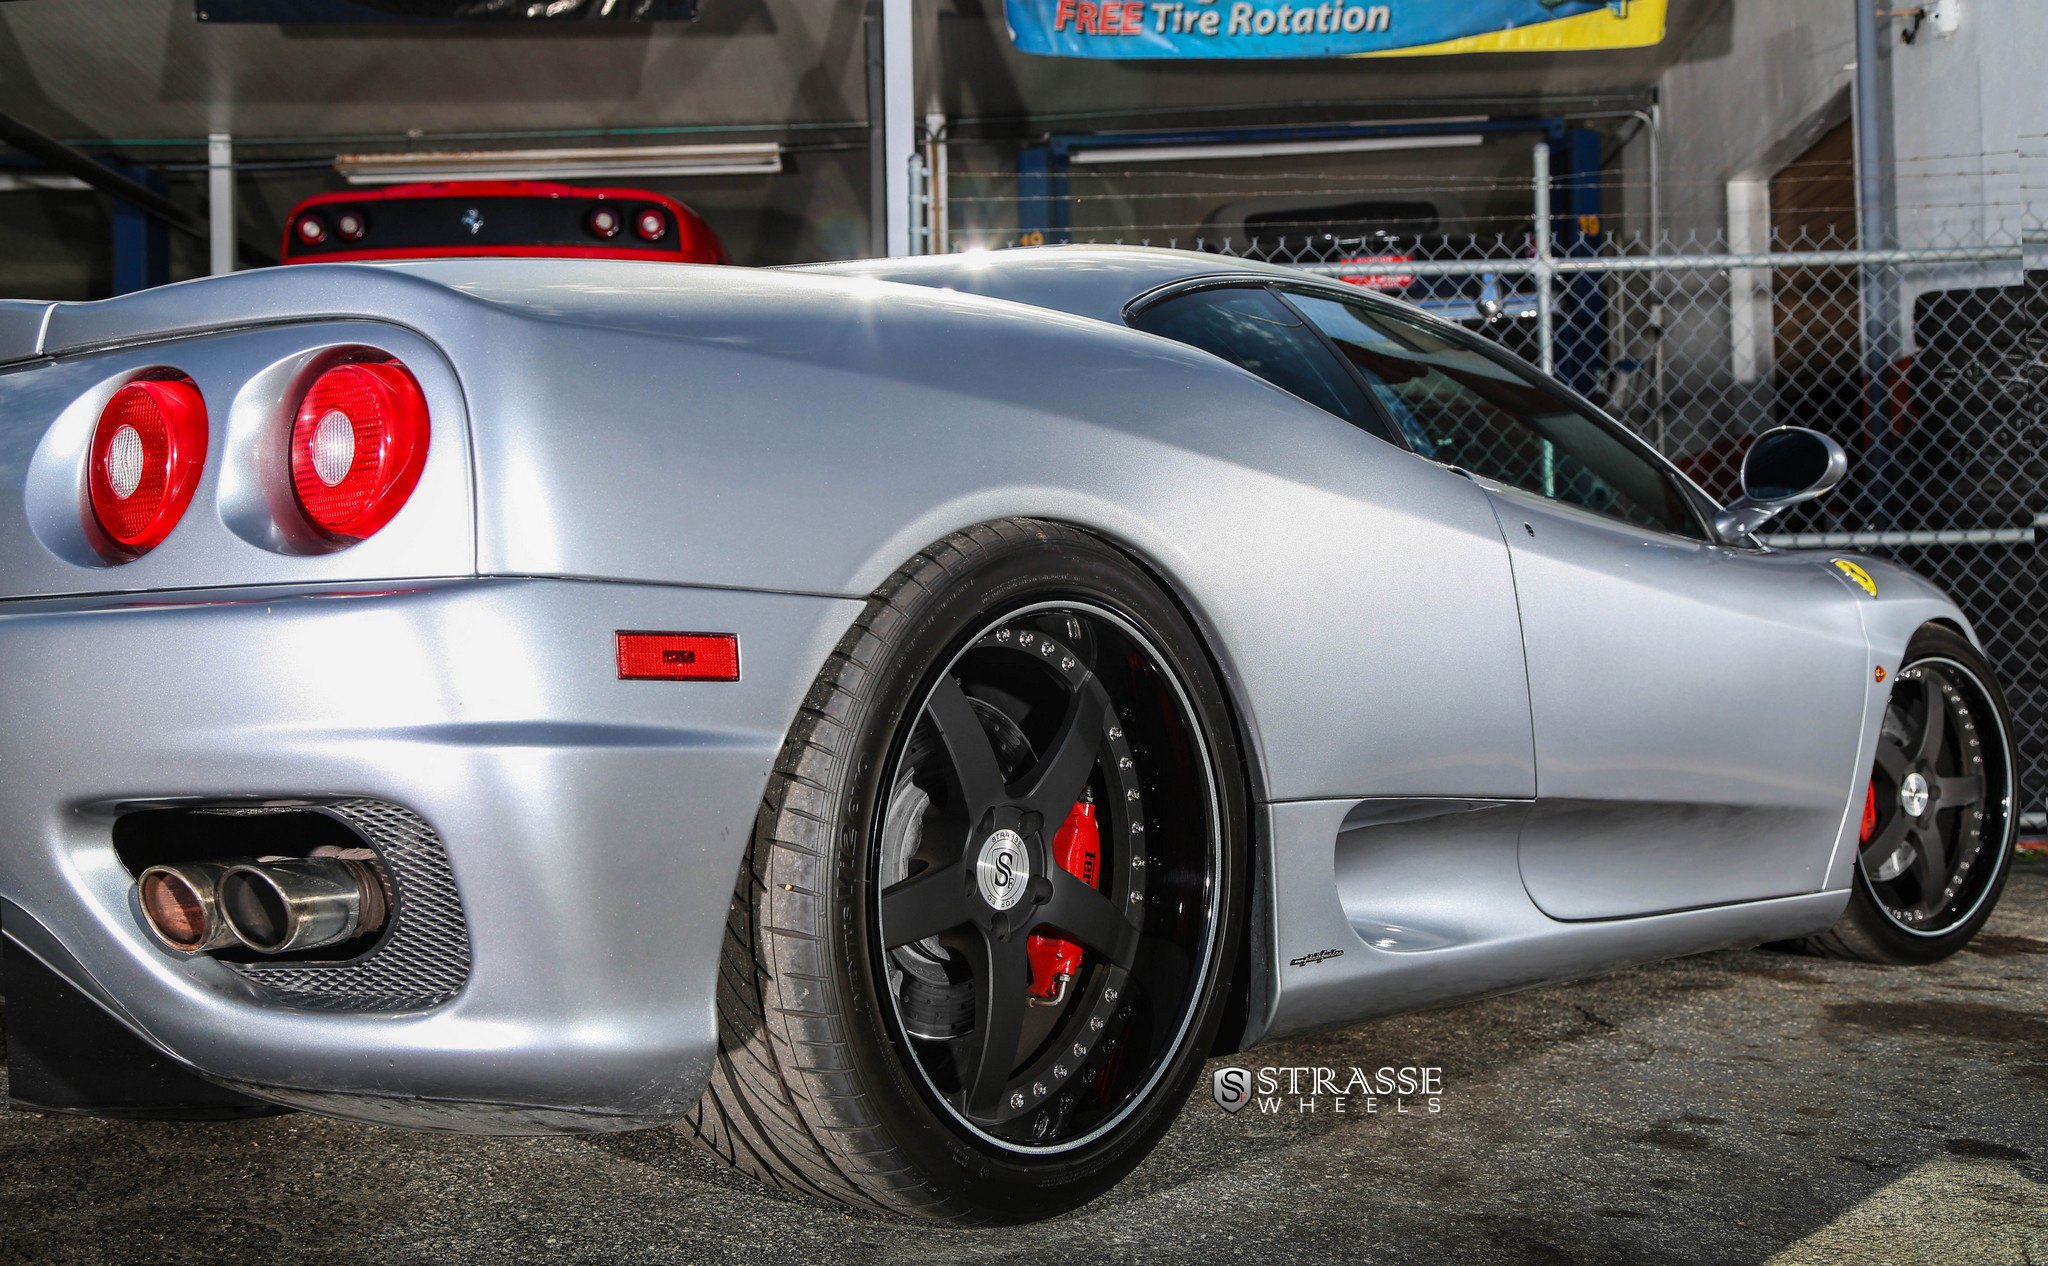 Aftermarket Rear Diffuser on Silver Ferrari 360 - Photo by Strasse Forged